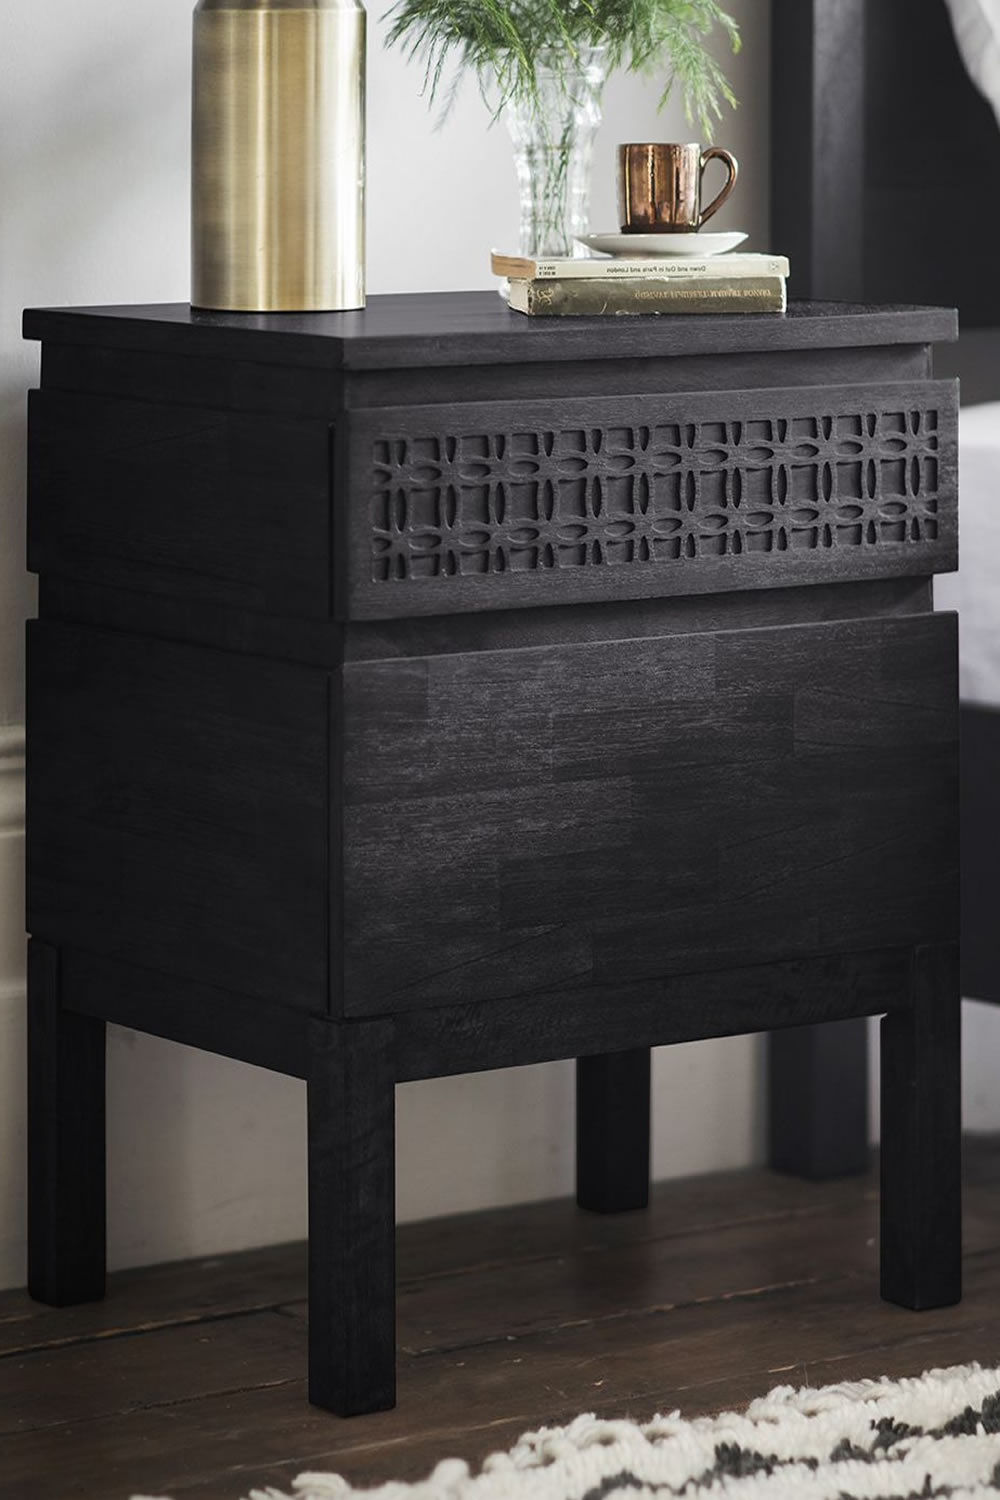 View Boho Black 2 Drawer Bedside Chest Crafted From Mango Wood Timber Veneers Modern Design Inlaid Drawer Fronts Bedroom Or Living Room Storage information